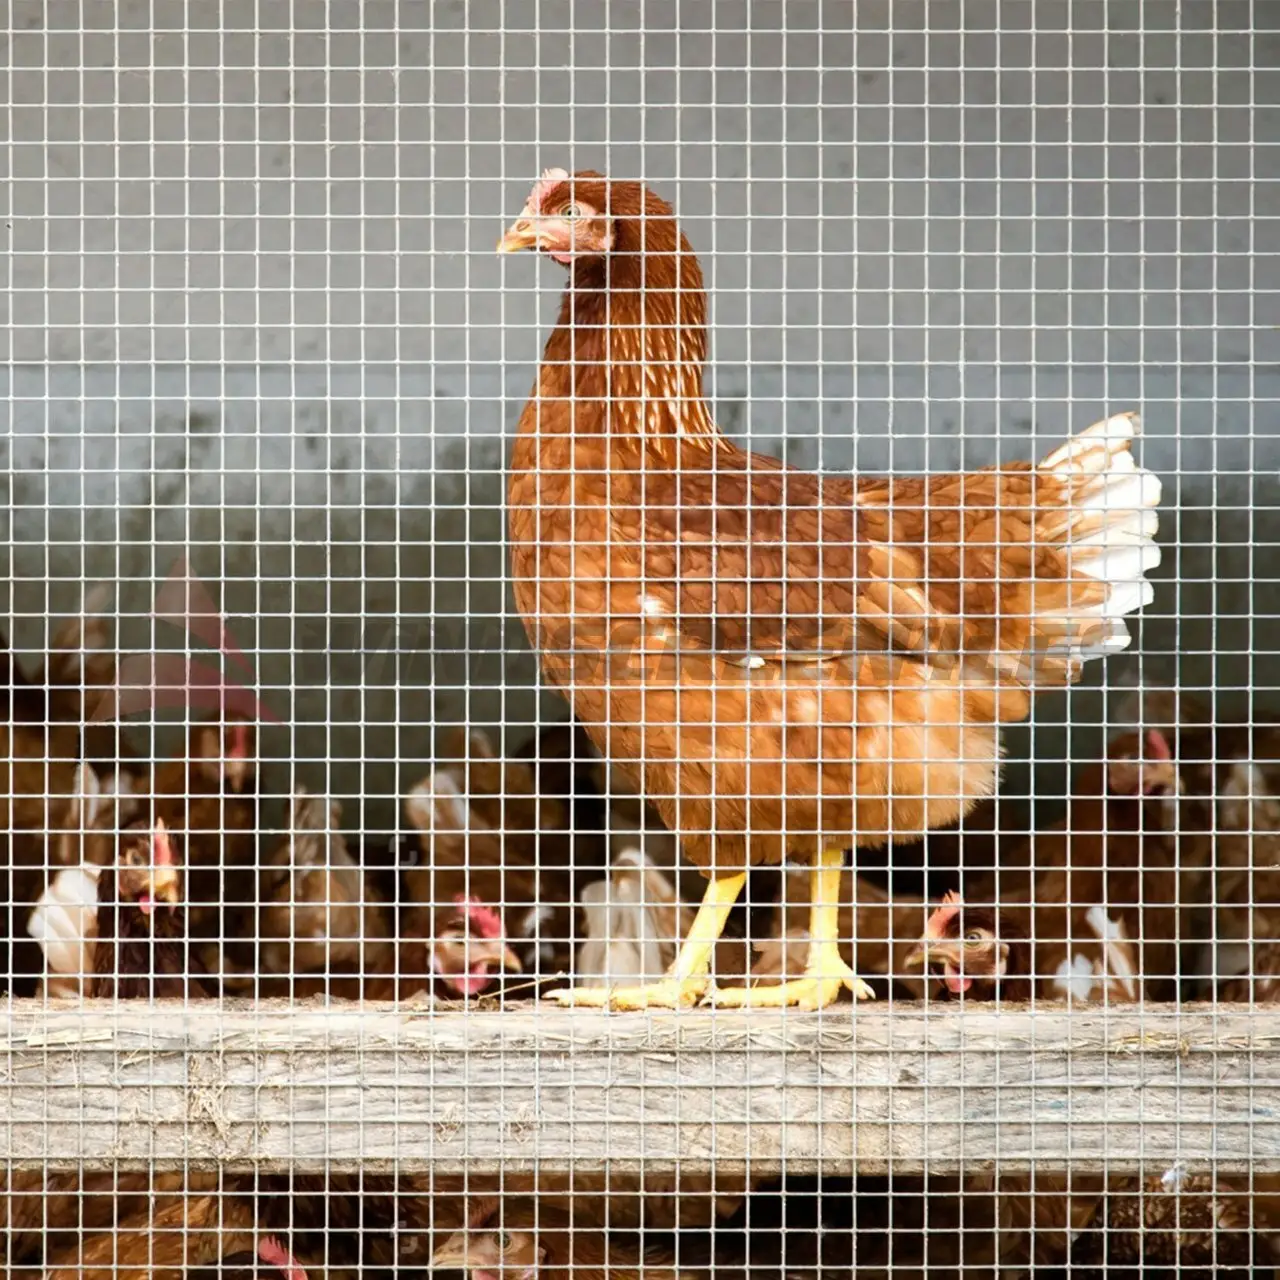 Top Sale chicken breeding net galvanized welded wire mesh for stopping animals from escaping